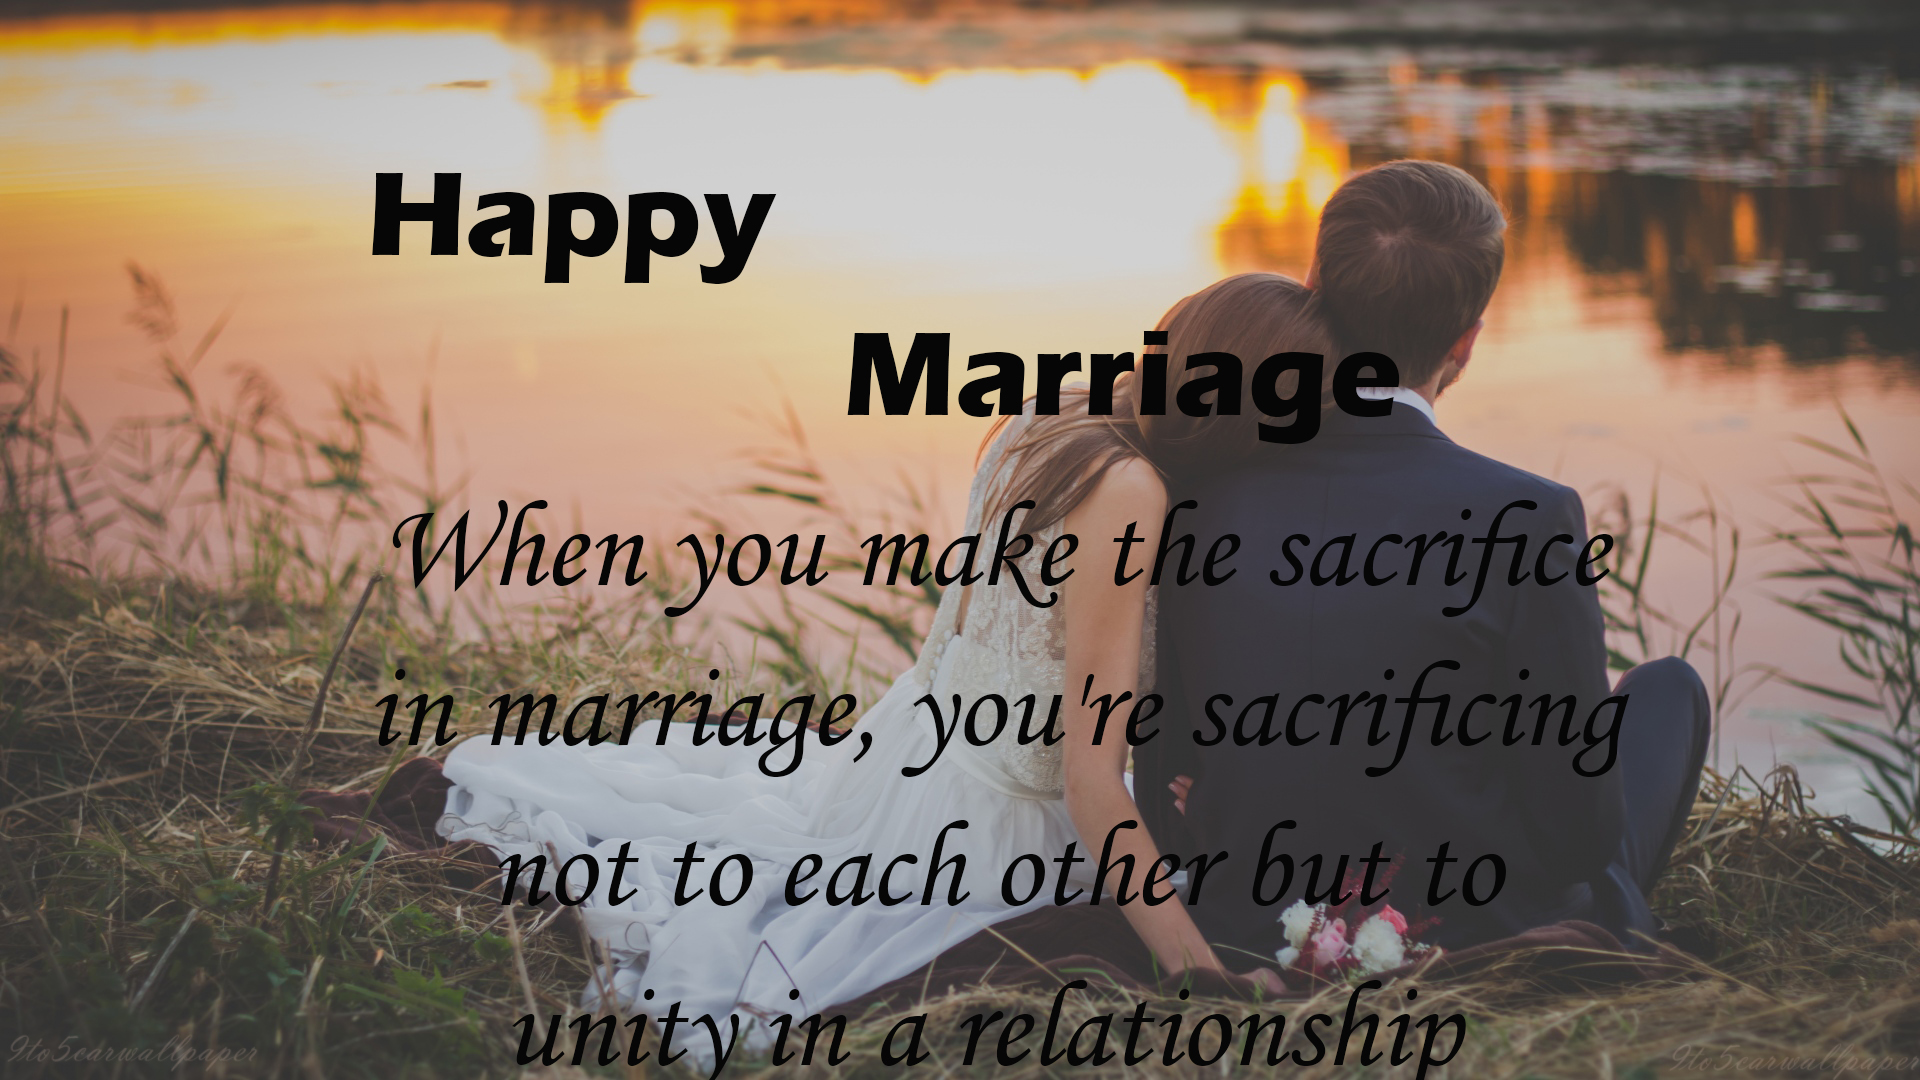 happy-marriage-wishes-quotes-images-hd-wallpapers-2017